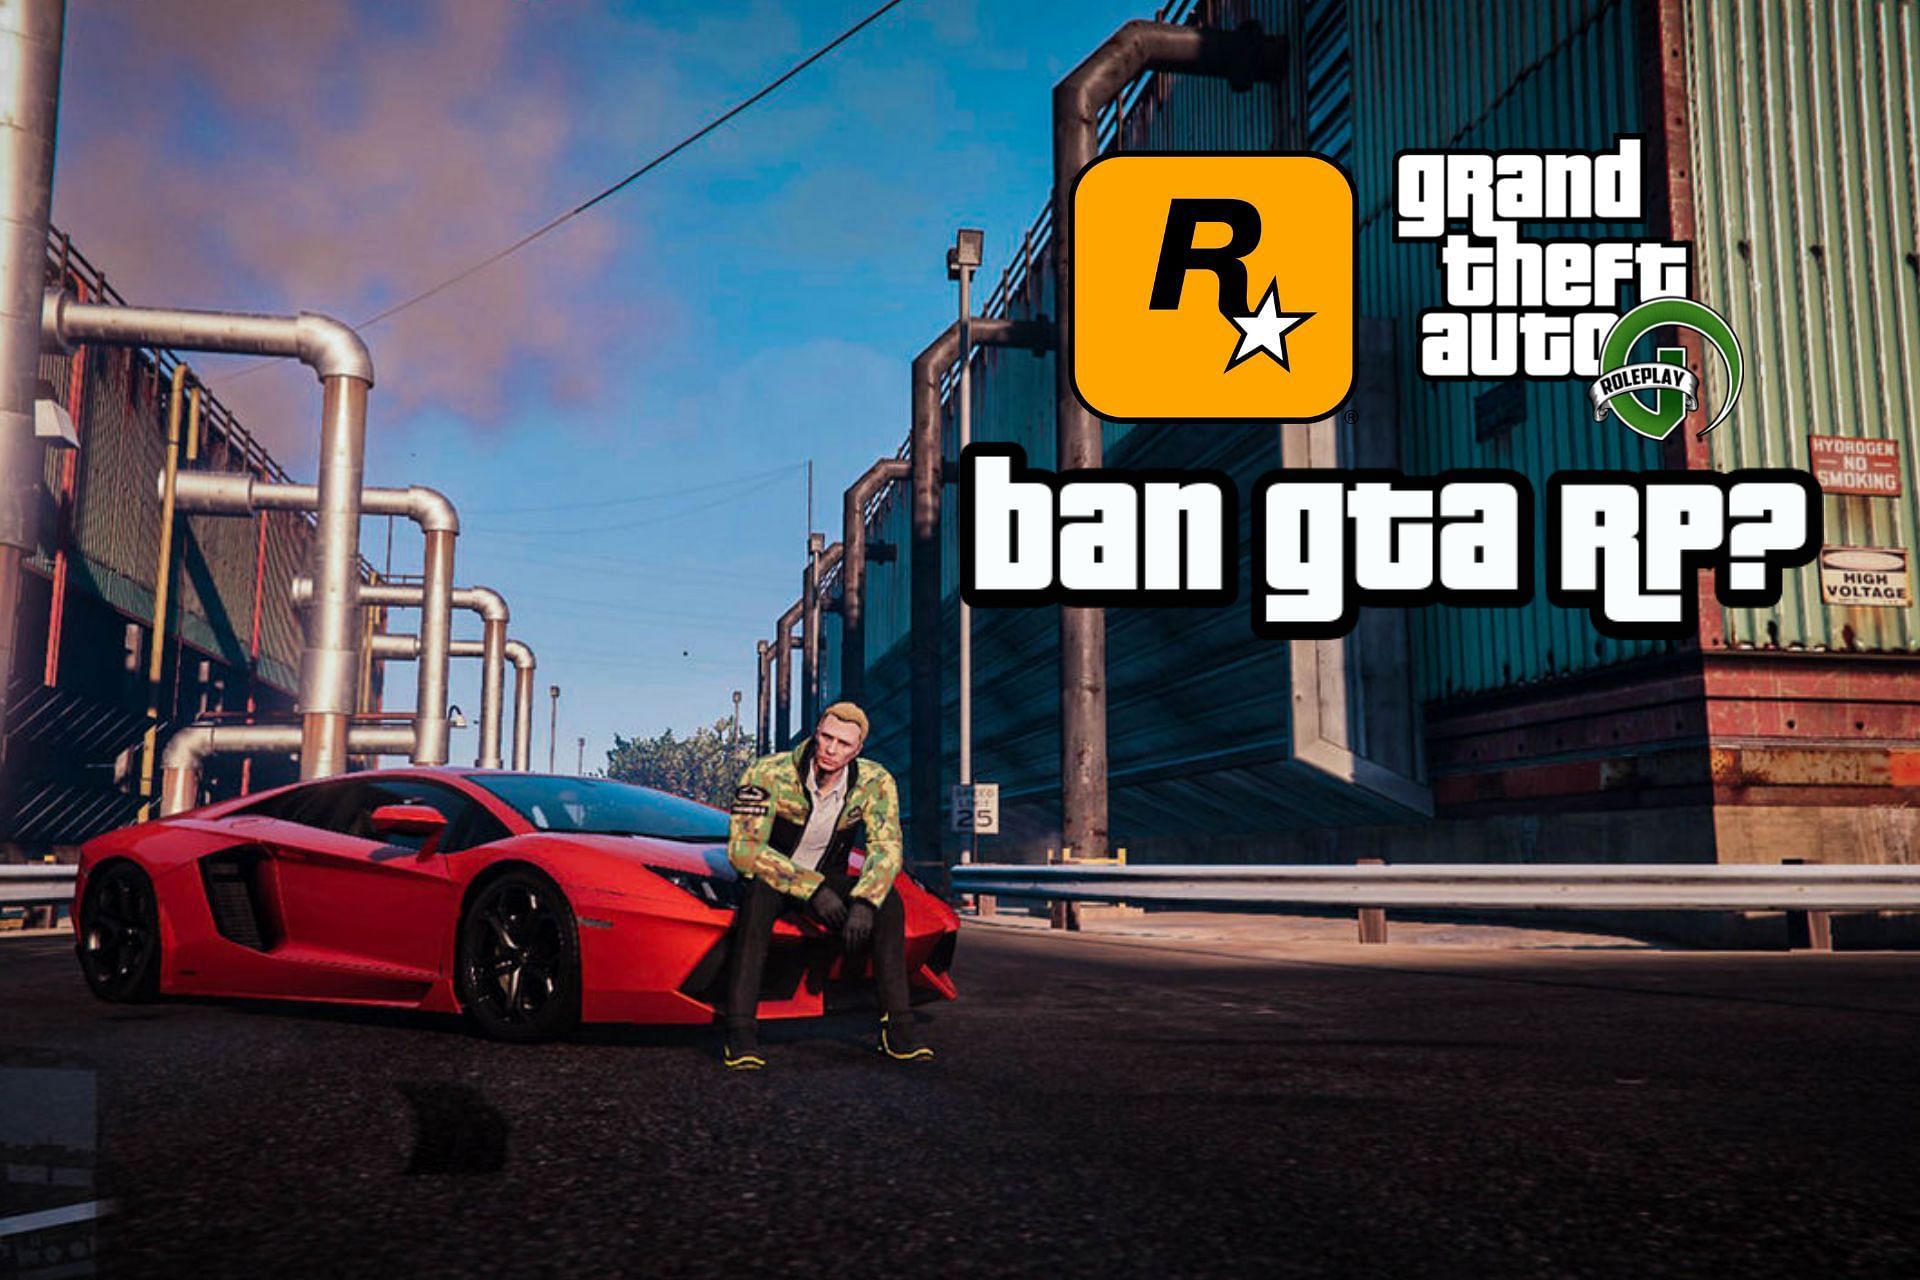 Fact Is going to ban GTA RP?